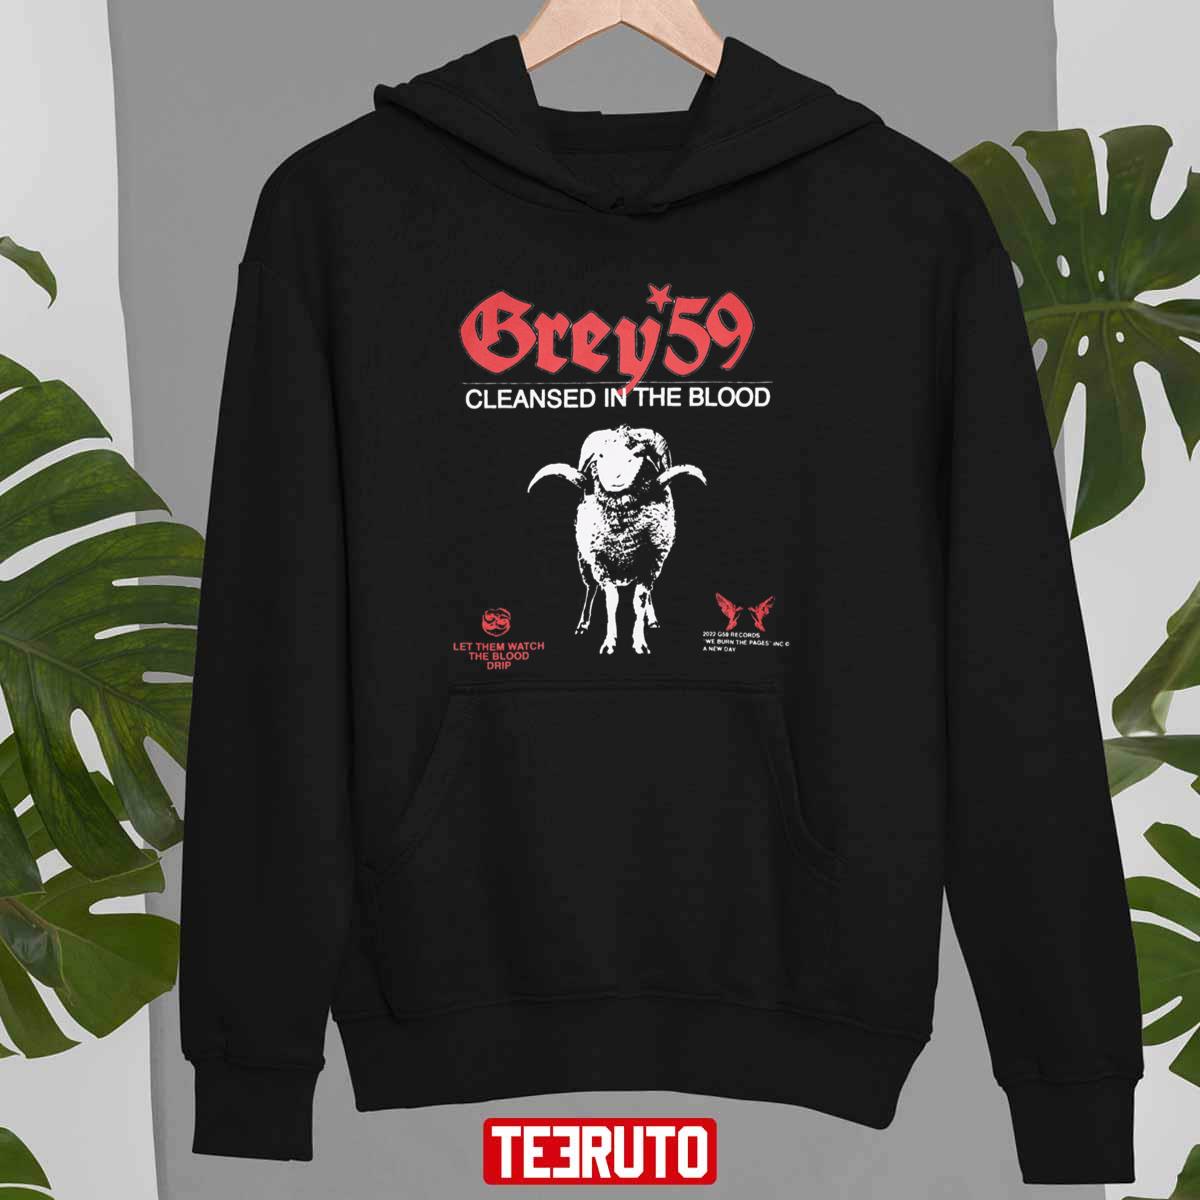 Cleansed In The Blood G59 Records Merch Unisex TShirt Teeruto